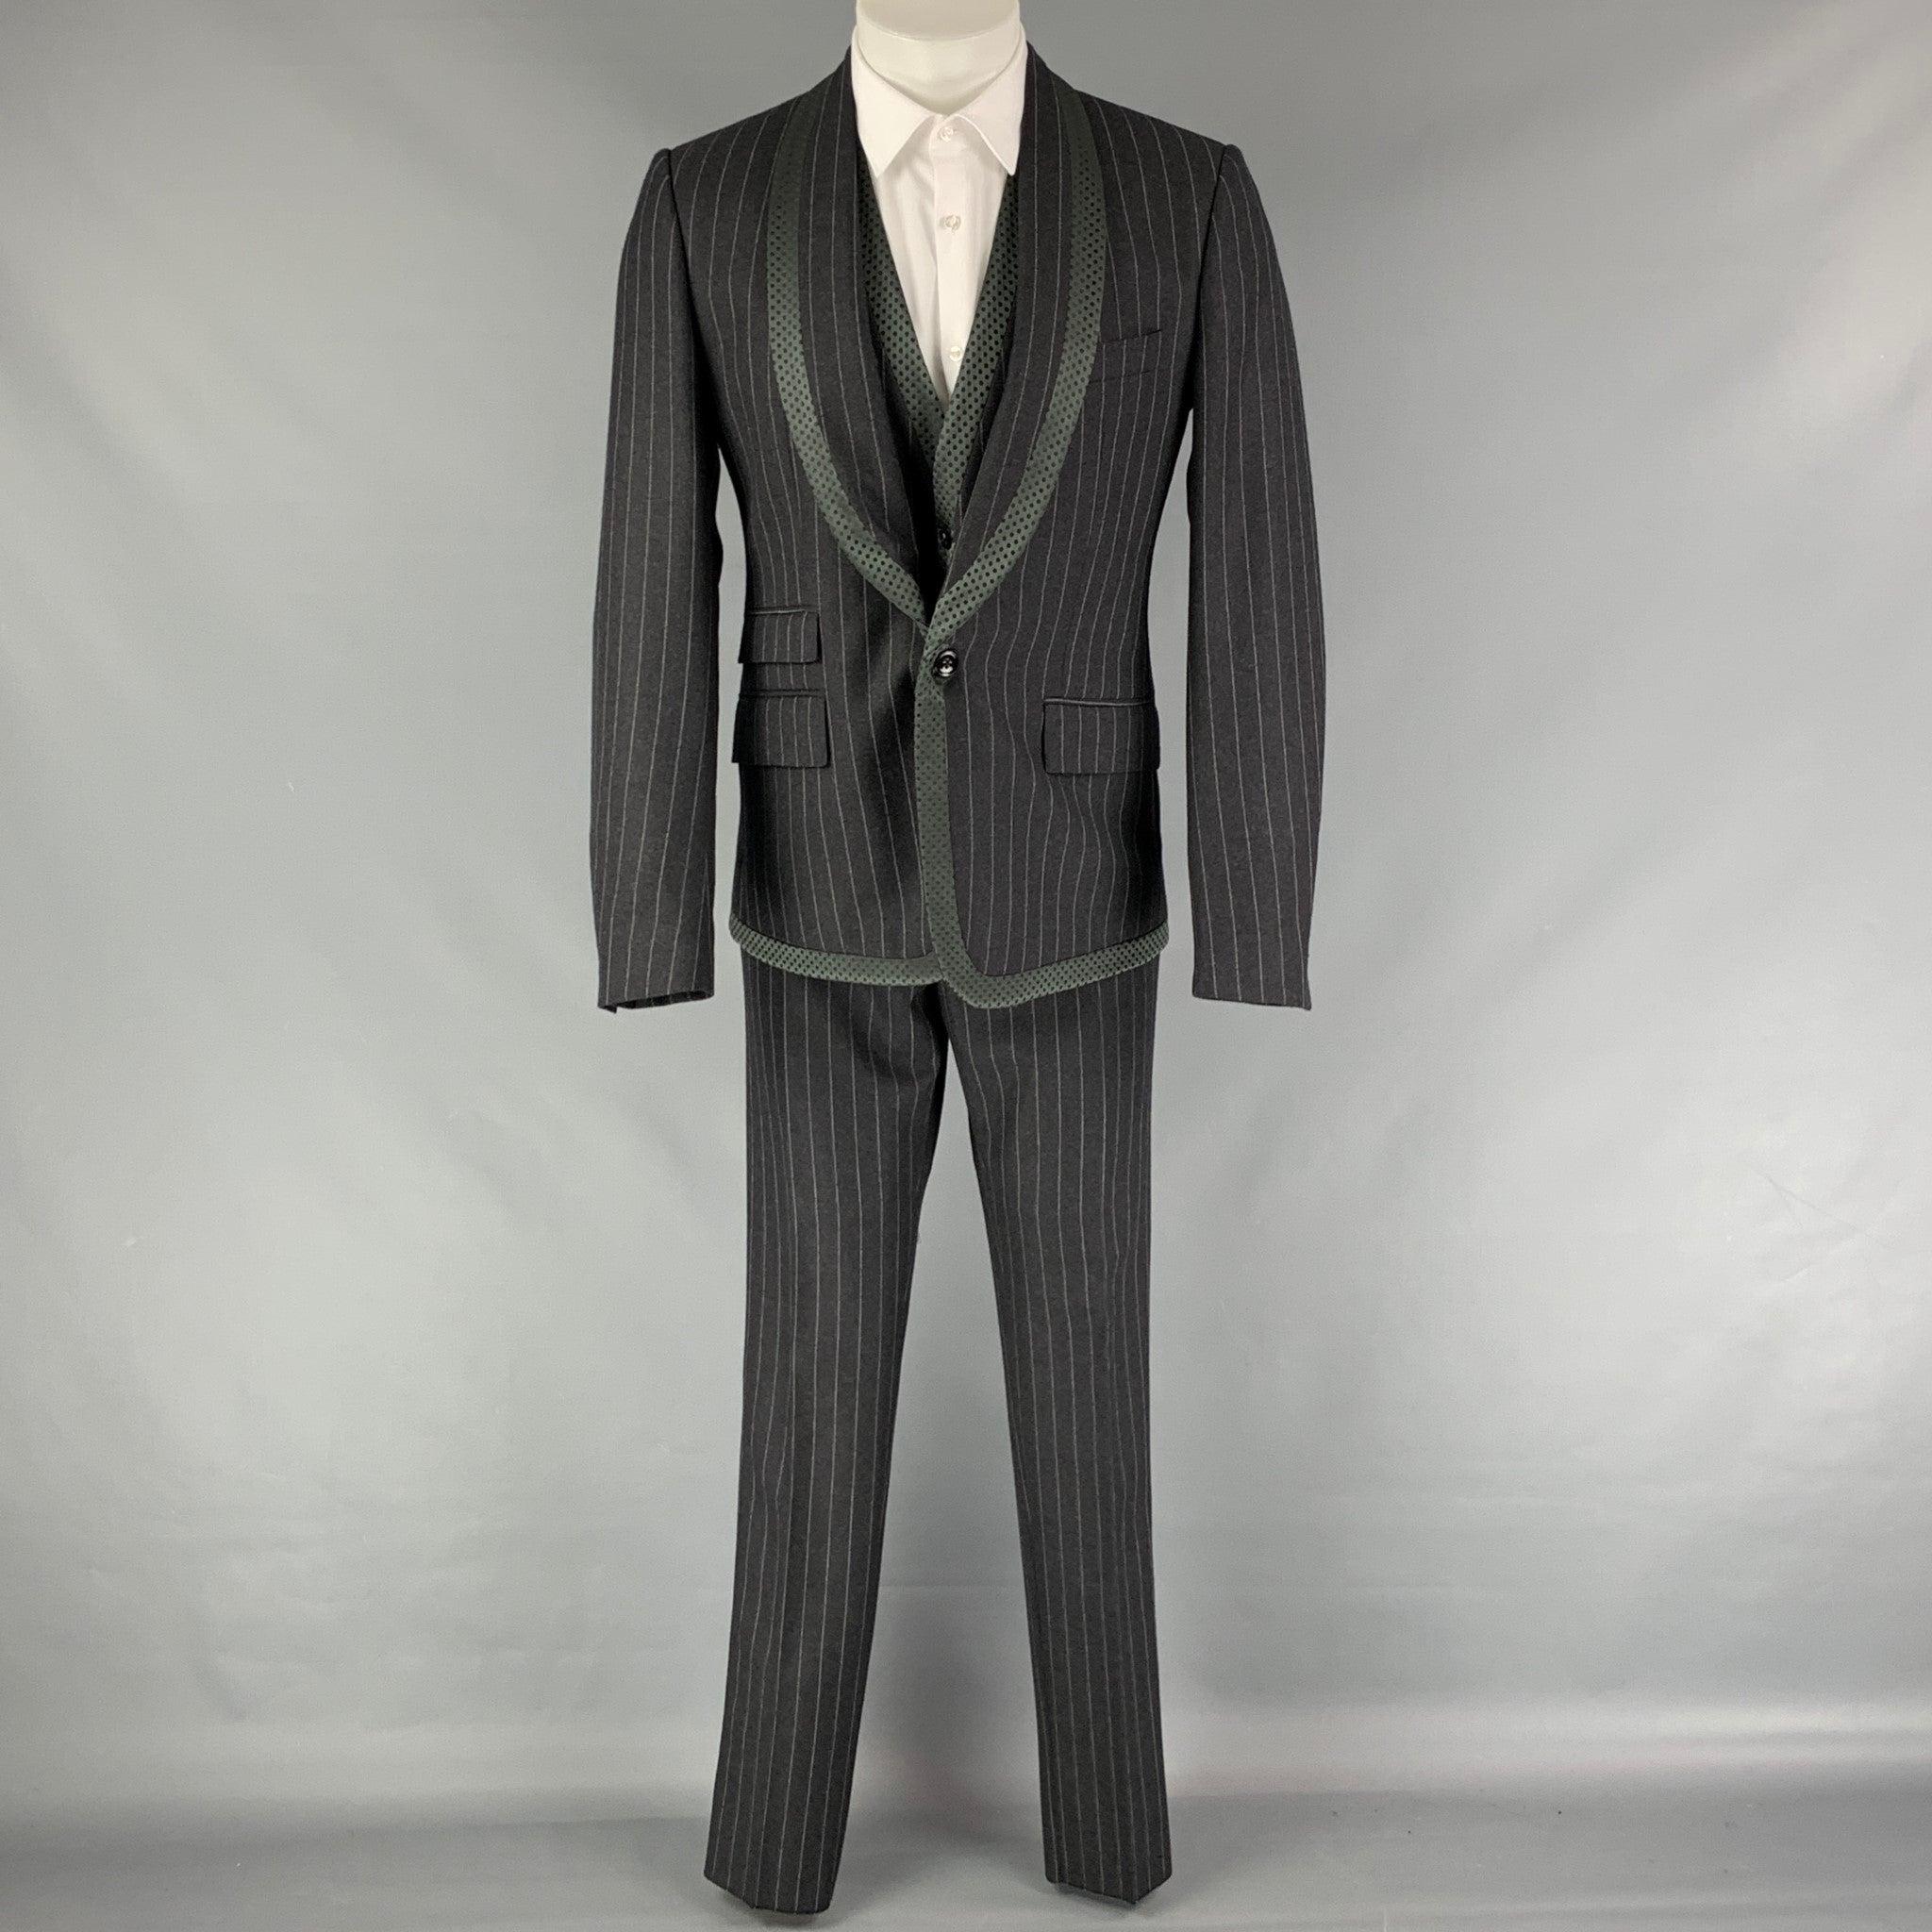 DOLCE & GABBANA Size 40 Regular Gray Chalkstripe Virgin Wool Shawl 3 Piece Suit In Good Condition For Sale In San Francisco, CA